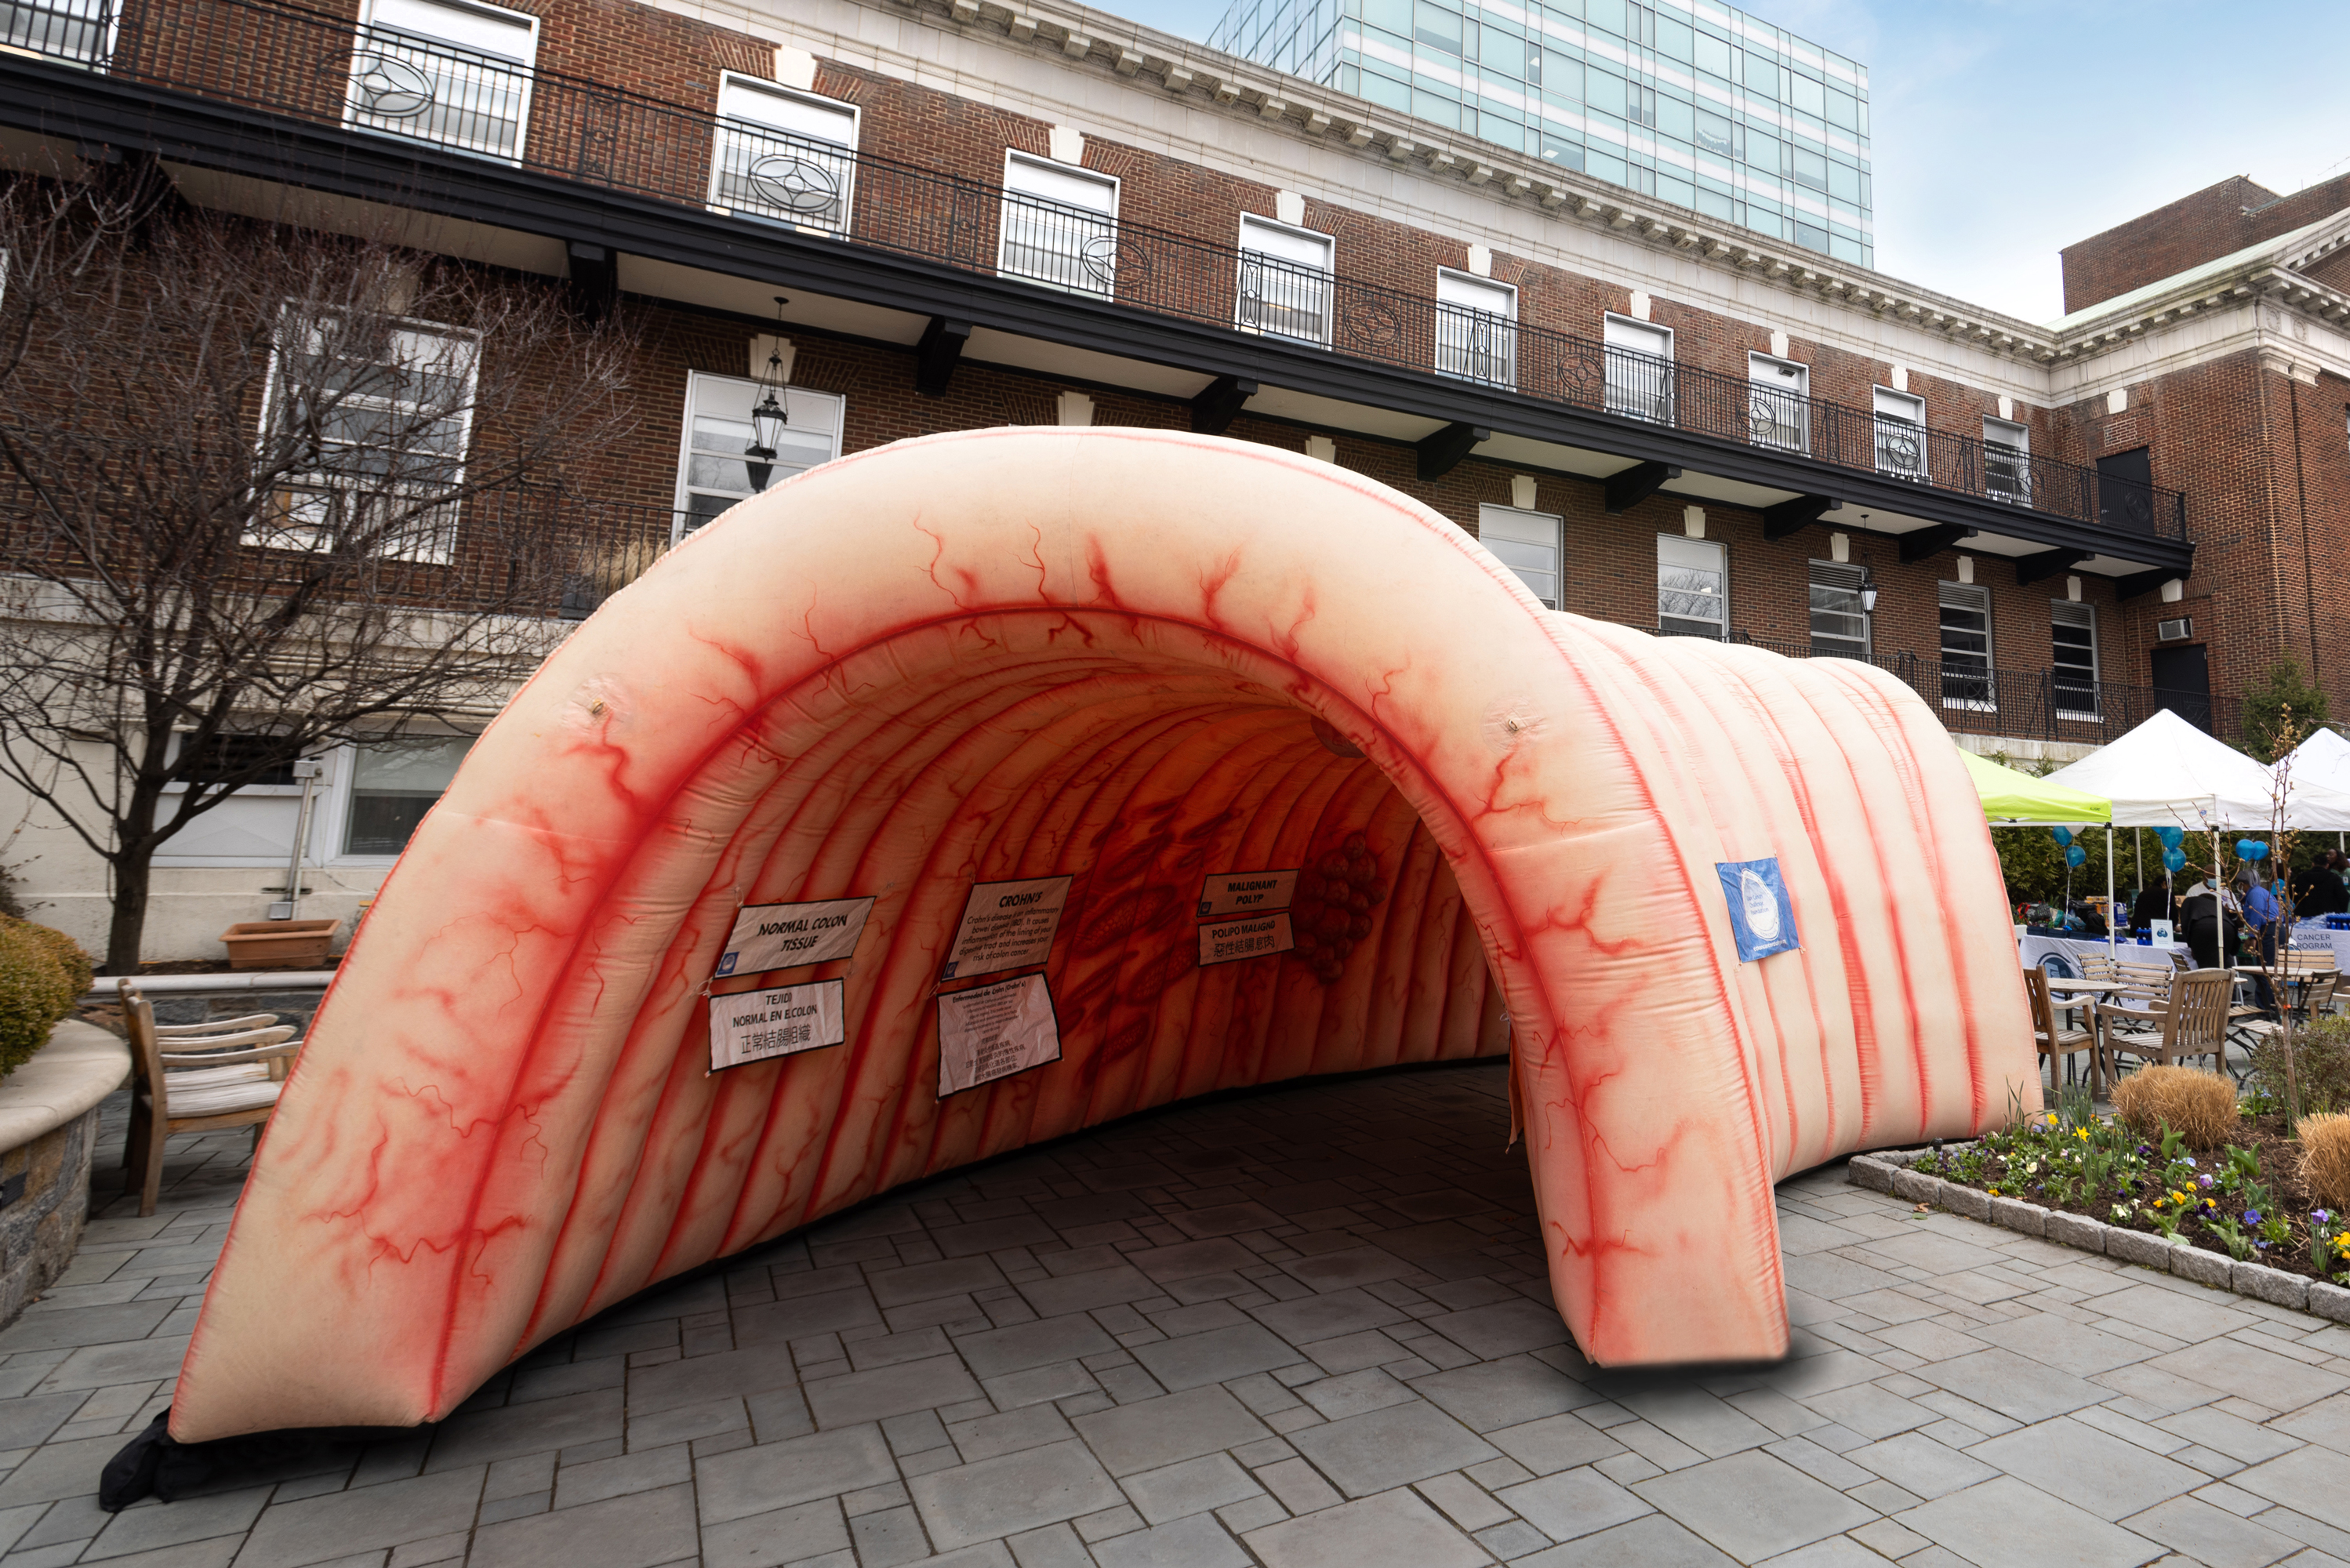 Giant inflatable colon from an educational pavillion in the hospital courtyard